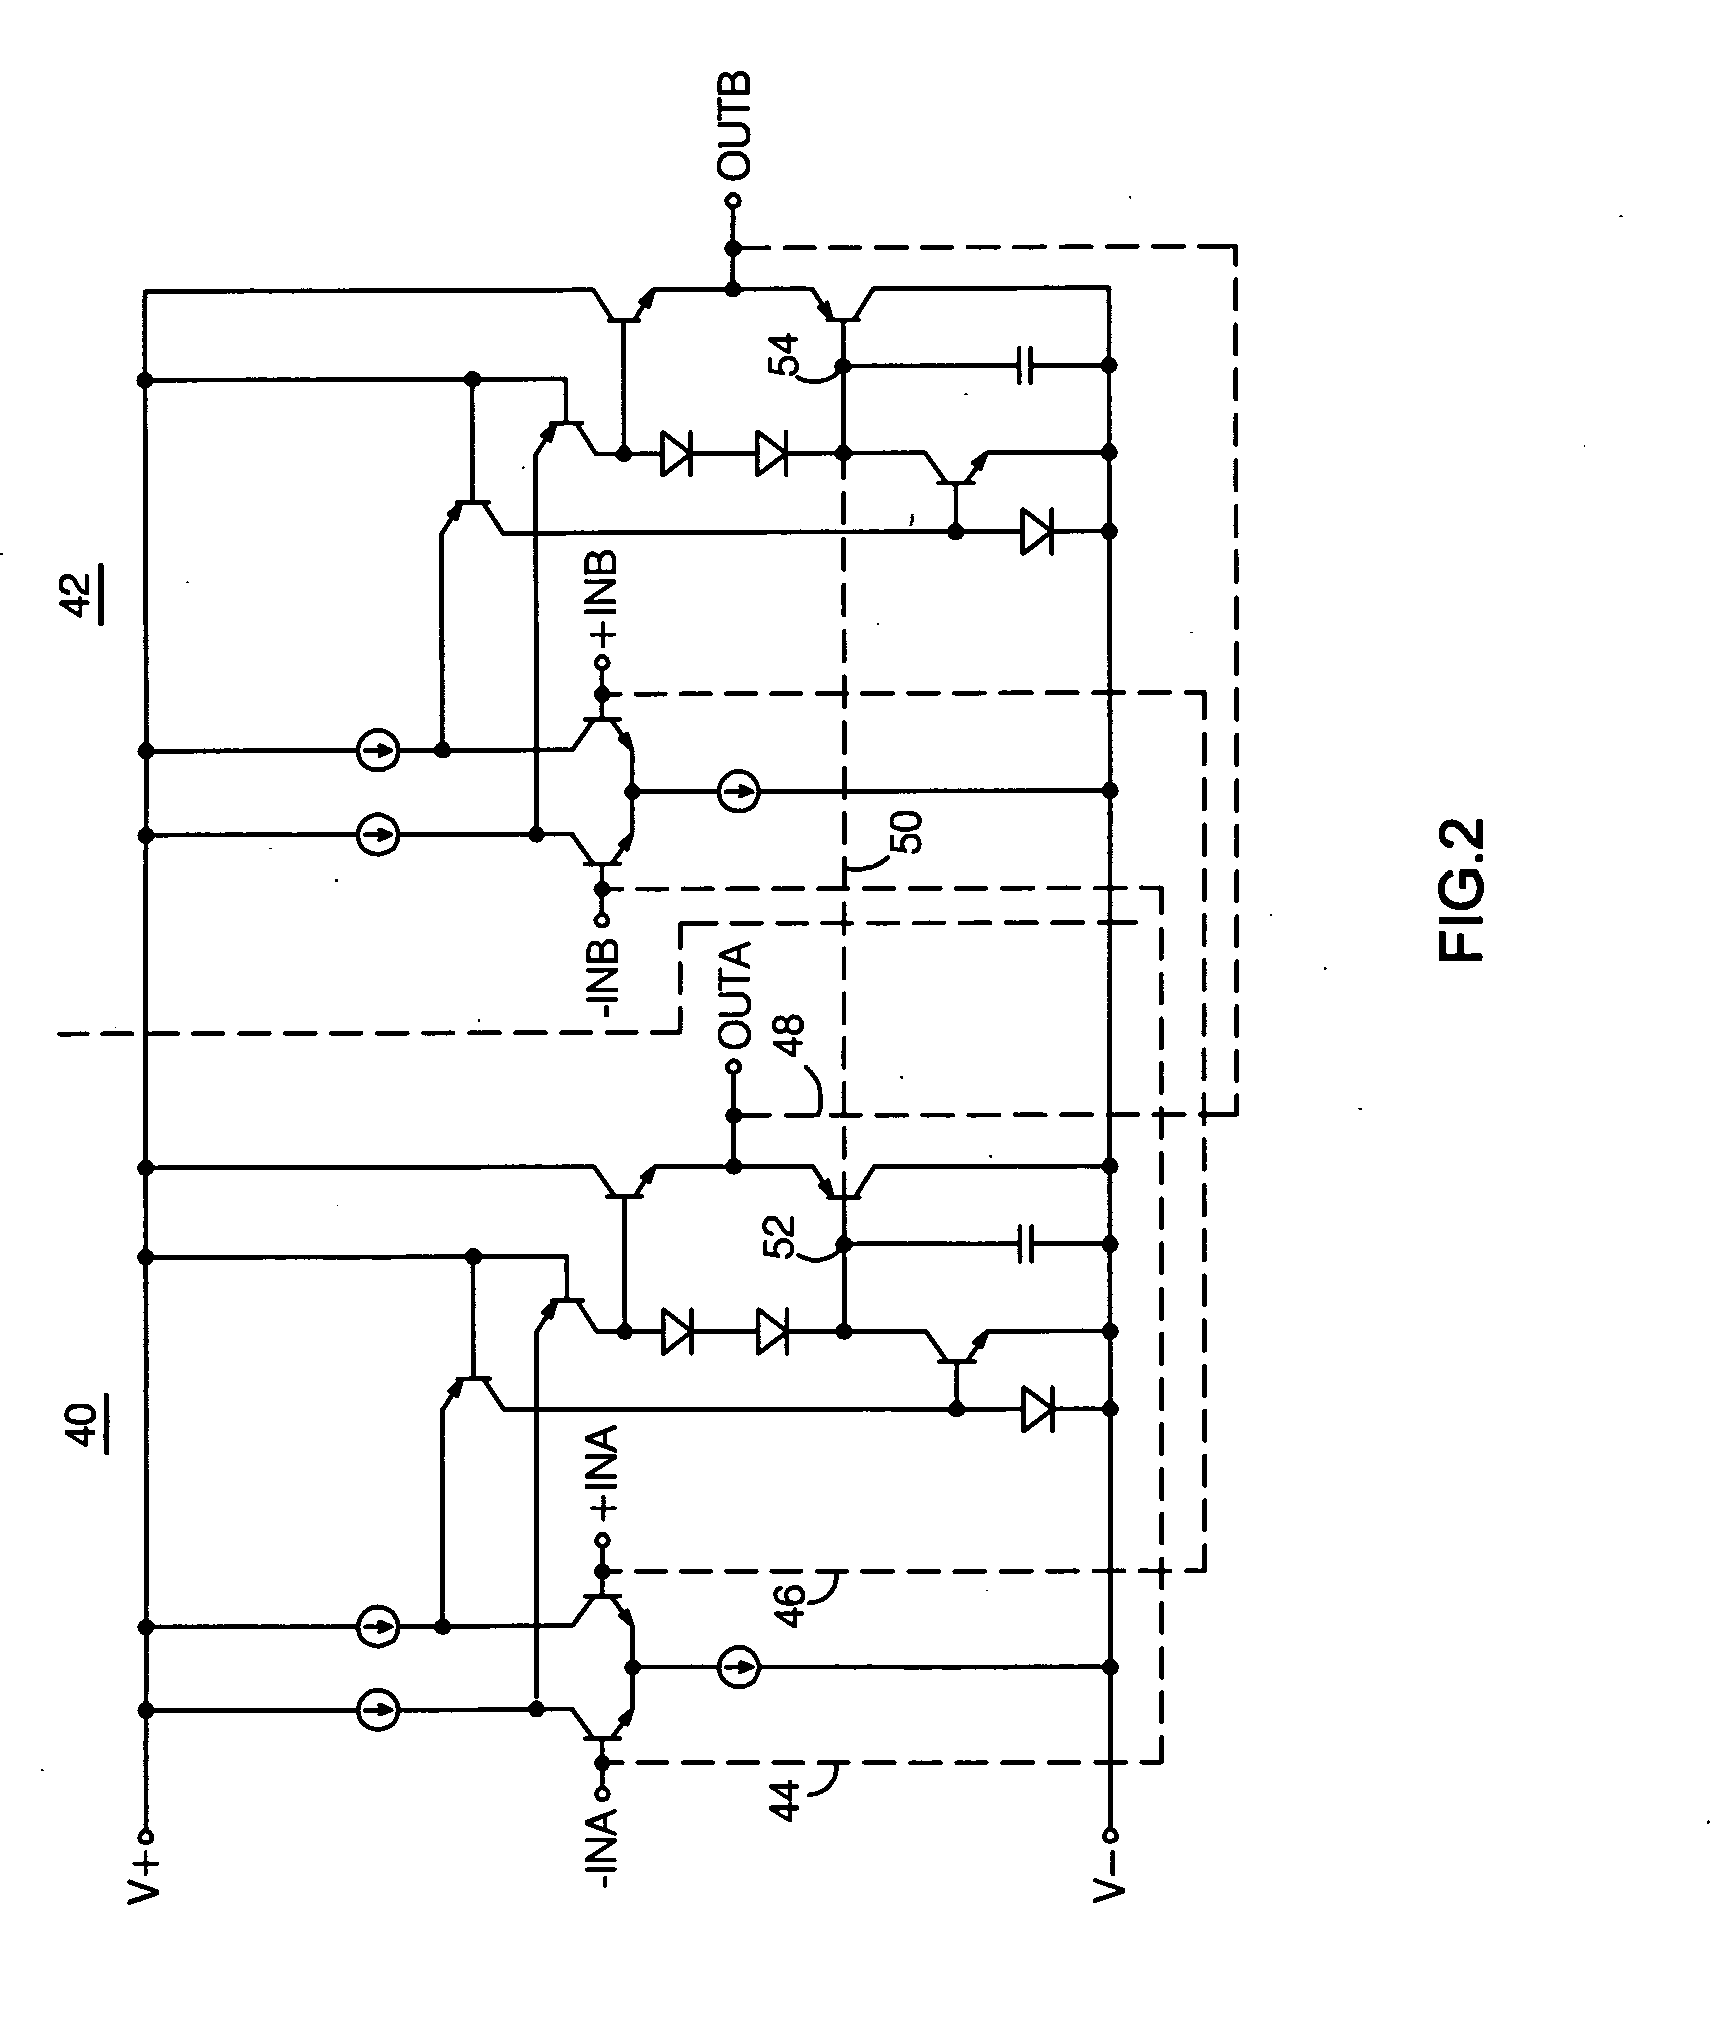 Dual op amp IC with single low noise op amp configuration